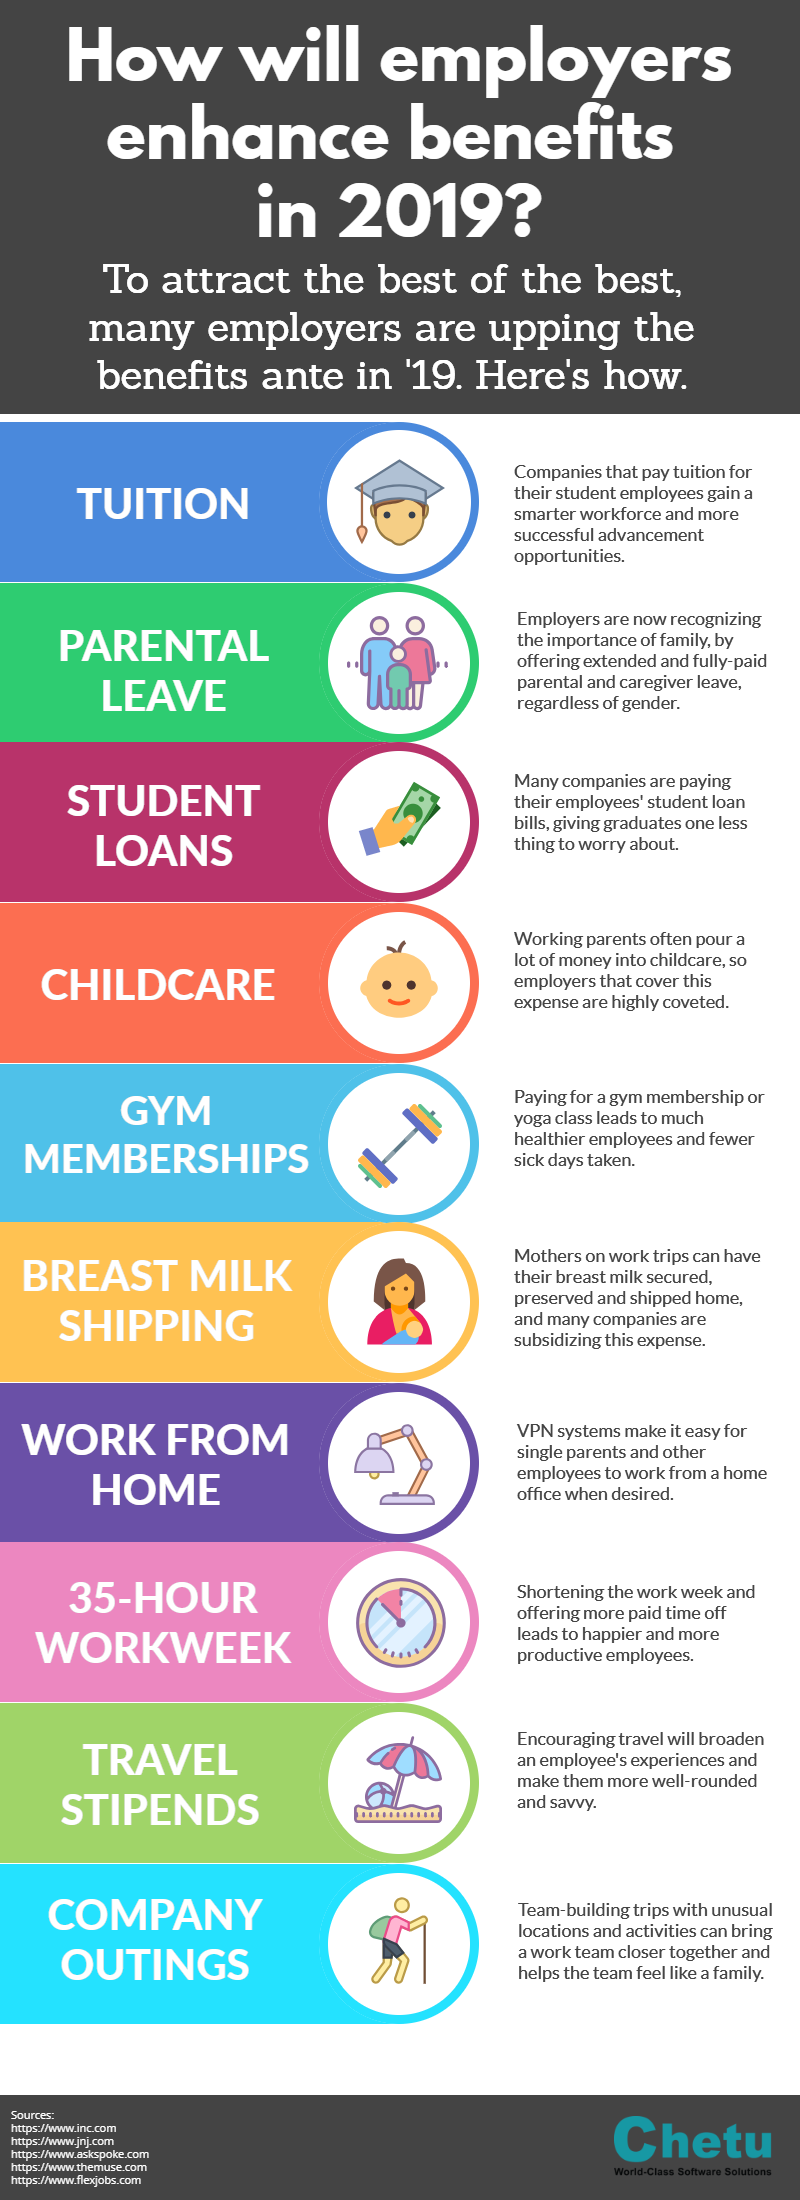 How_Will_Employers_Enhance_Benefits_in_2019